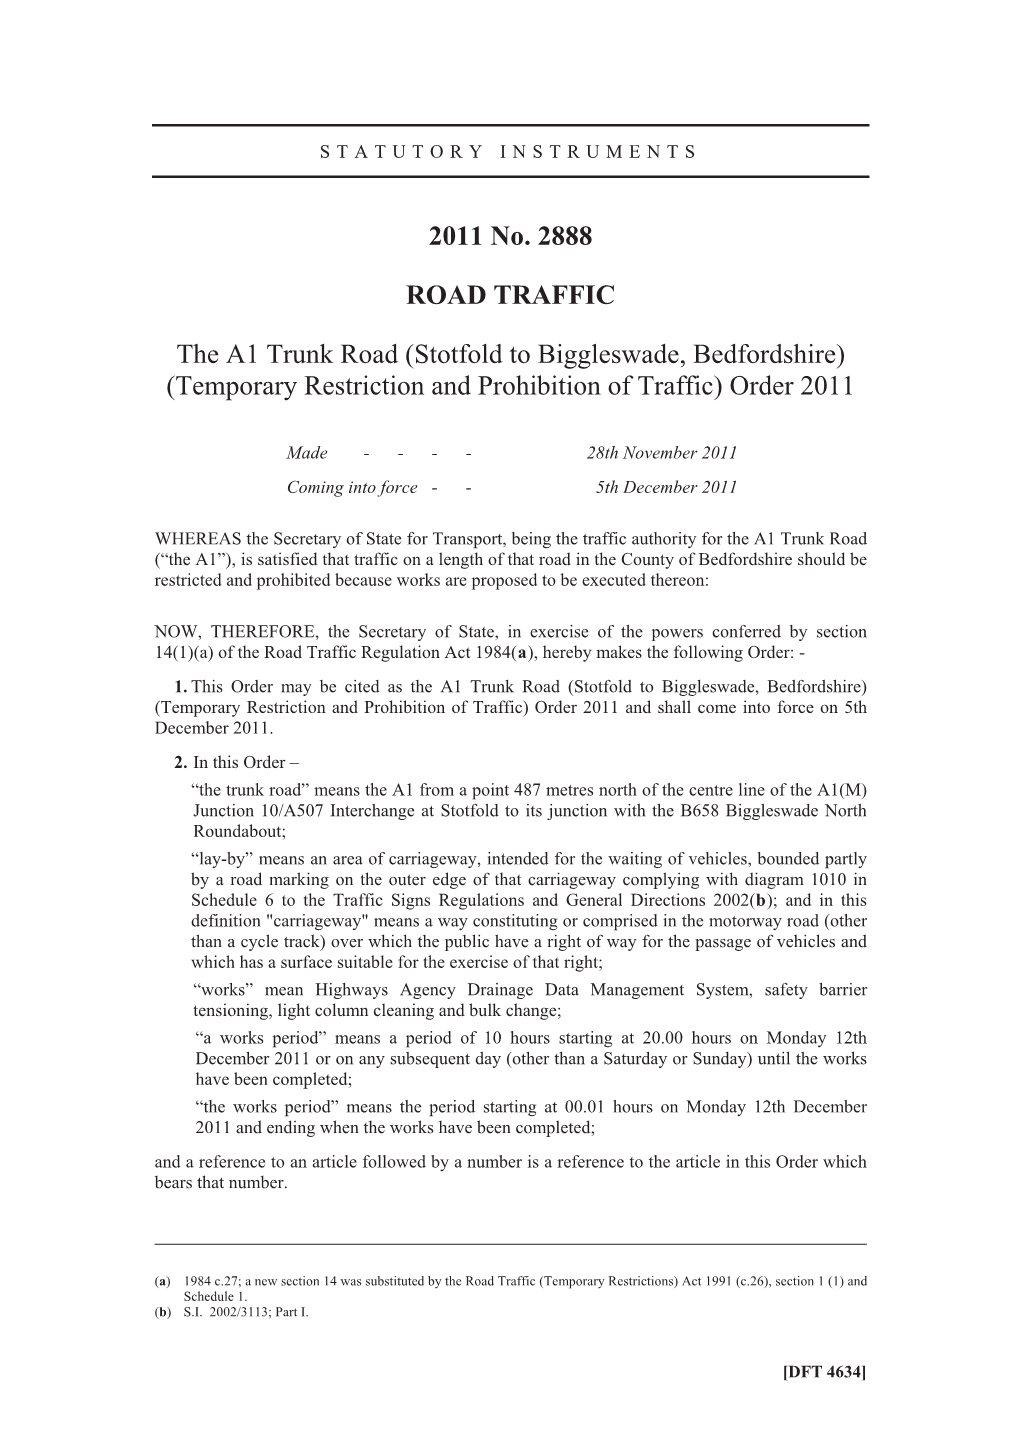 The A1 Trunk Road (Stotfold to Biggleswade, Bedfordshire) (Temporary Restriction and Prohibition of Traffic) Order 2011